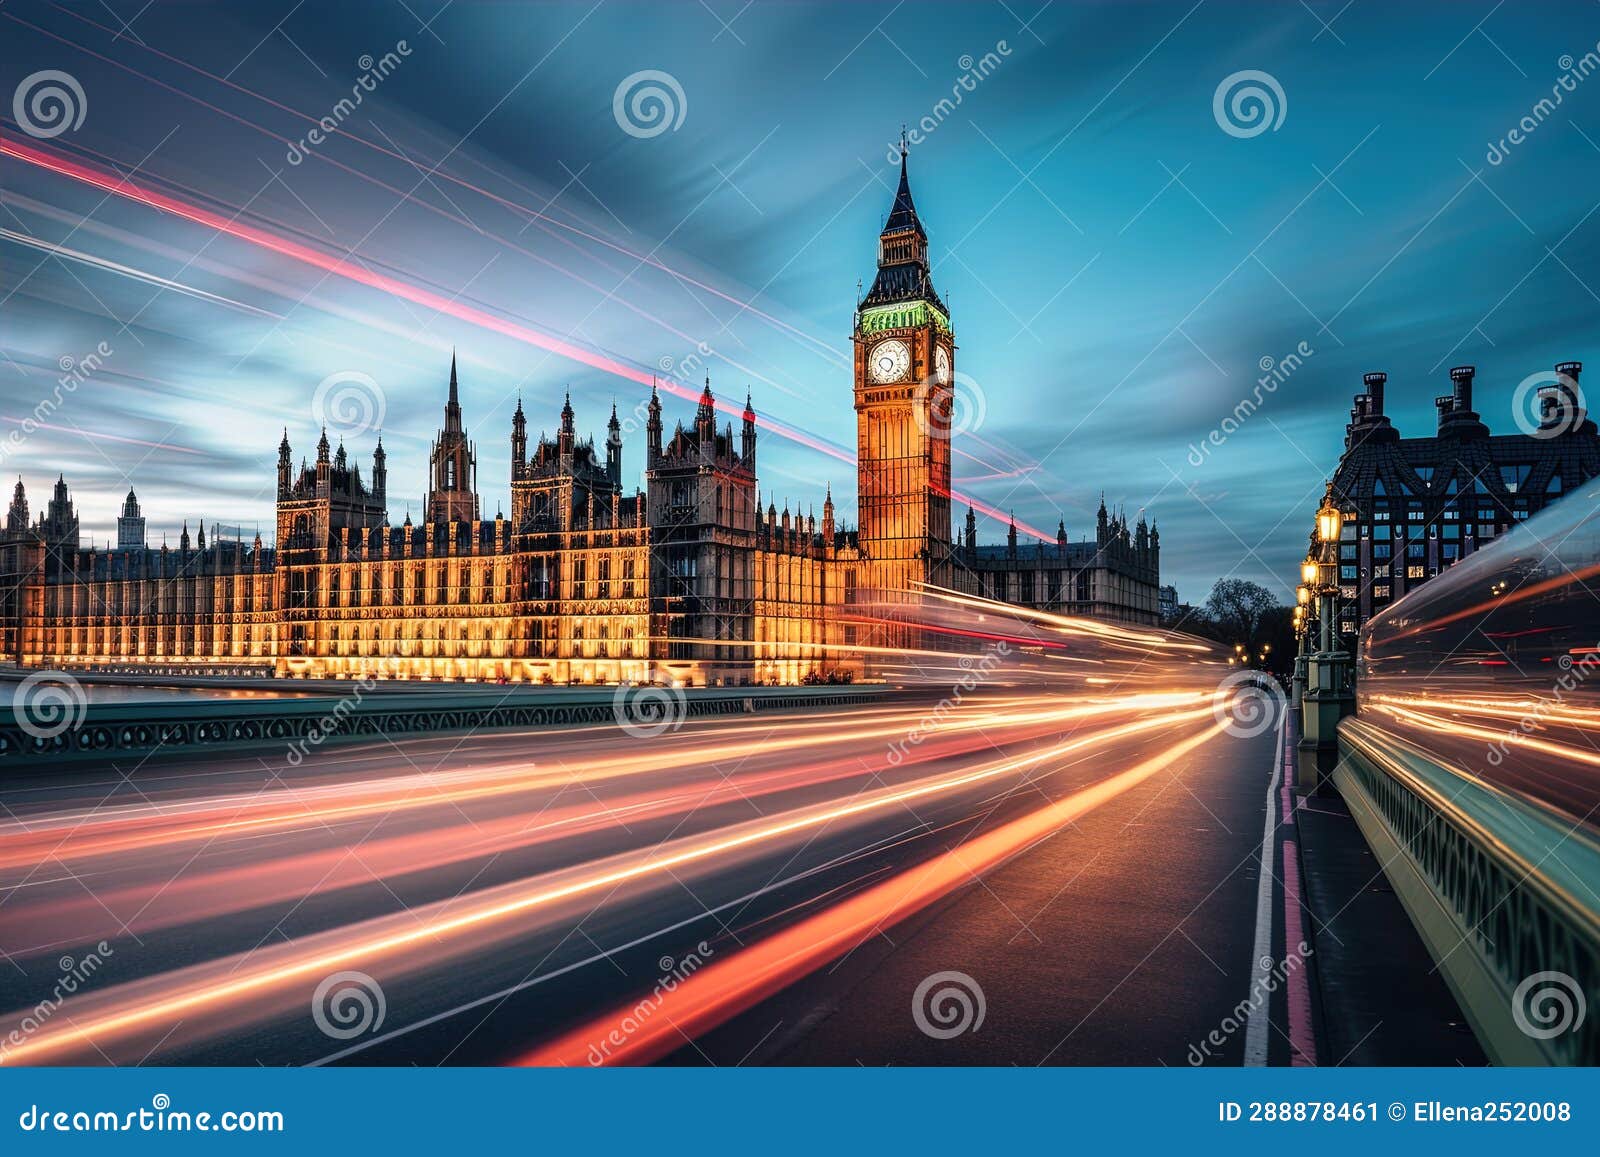 London, United Kingdom. Big Ben and Parliament Building during Blue ...